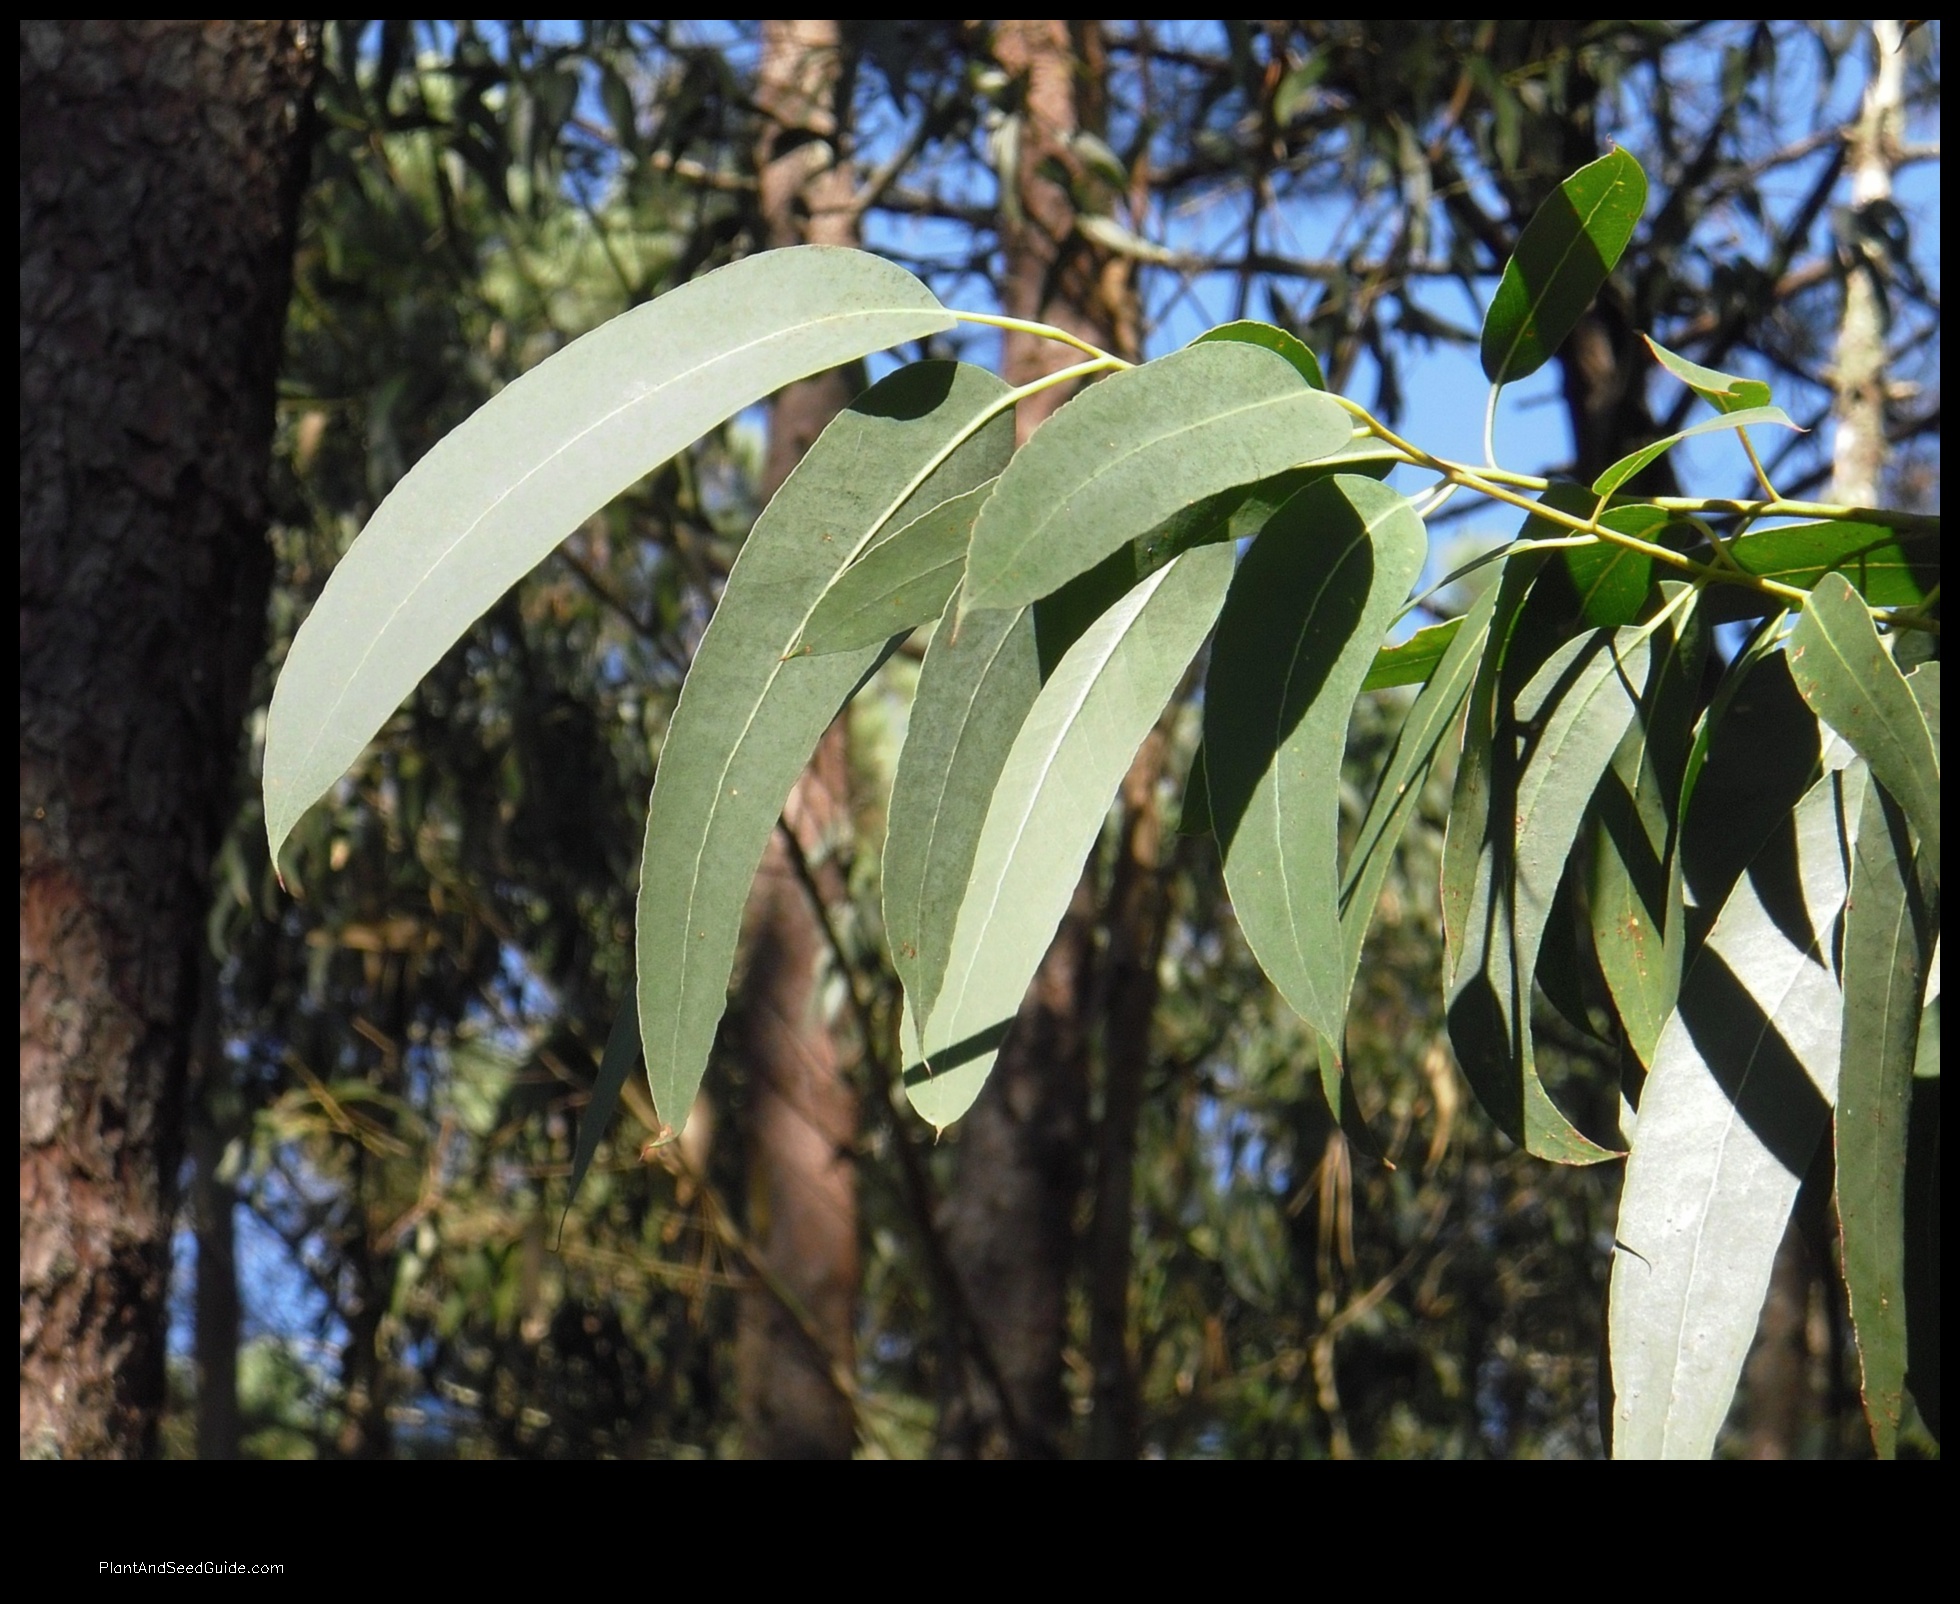 which eucalyptus plant smells best